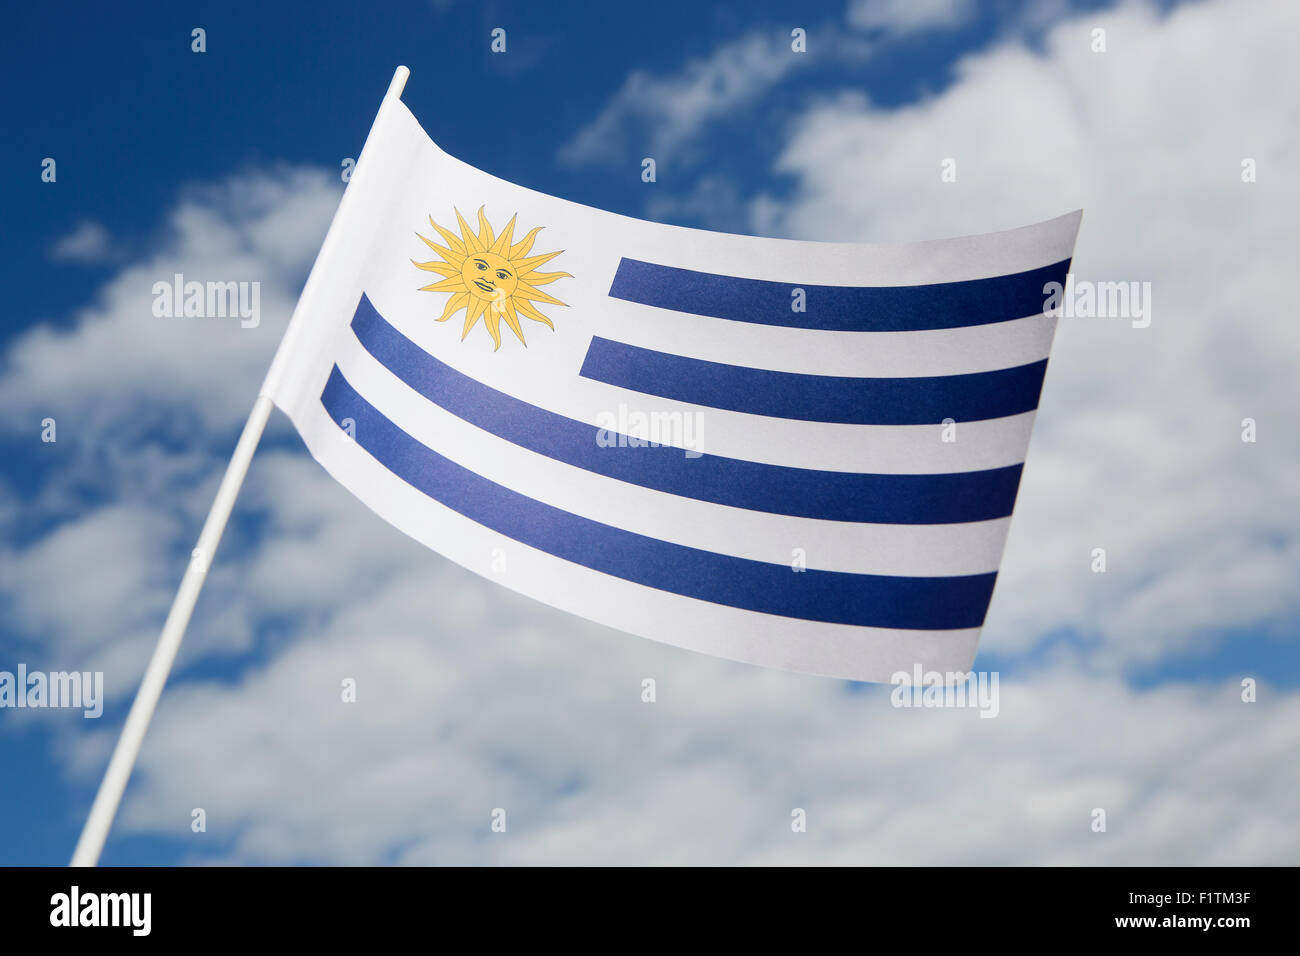 Uruguay flag in front of a blue sky Stock Photo